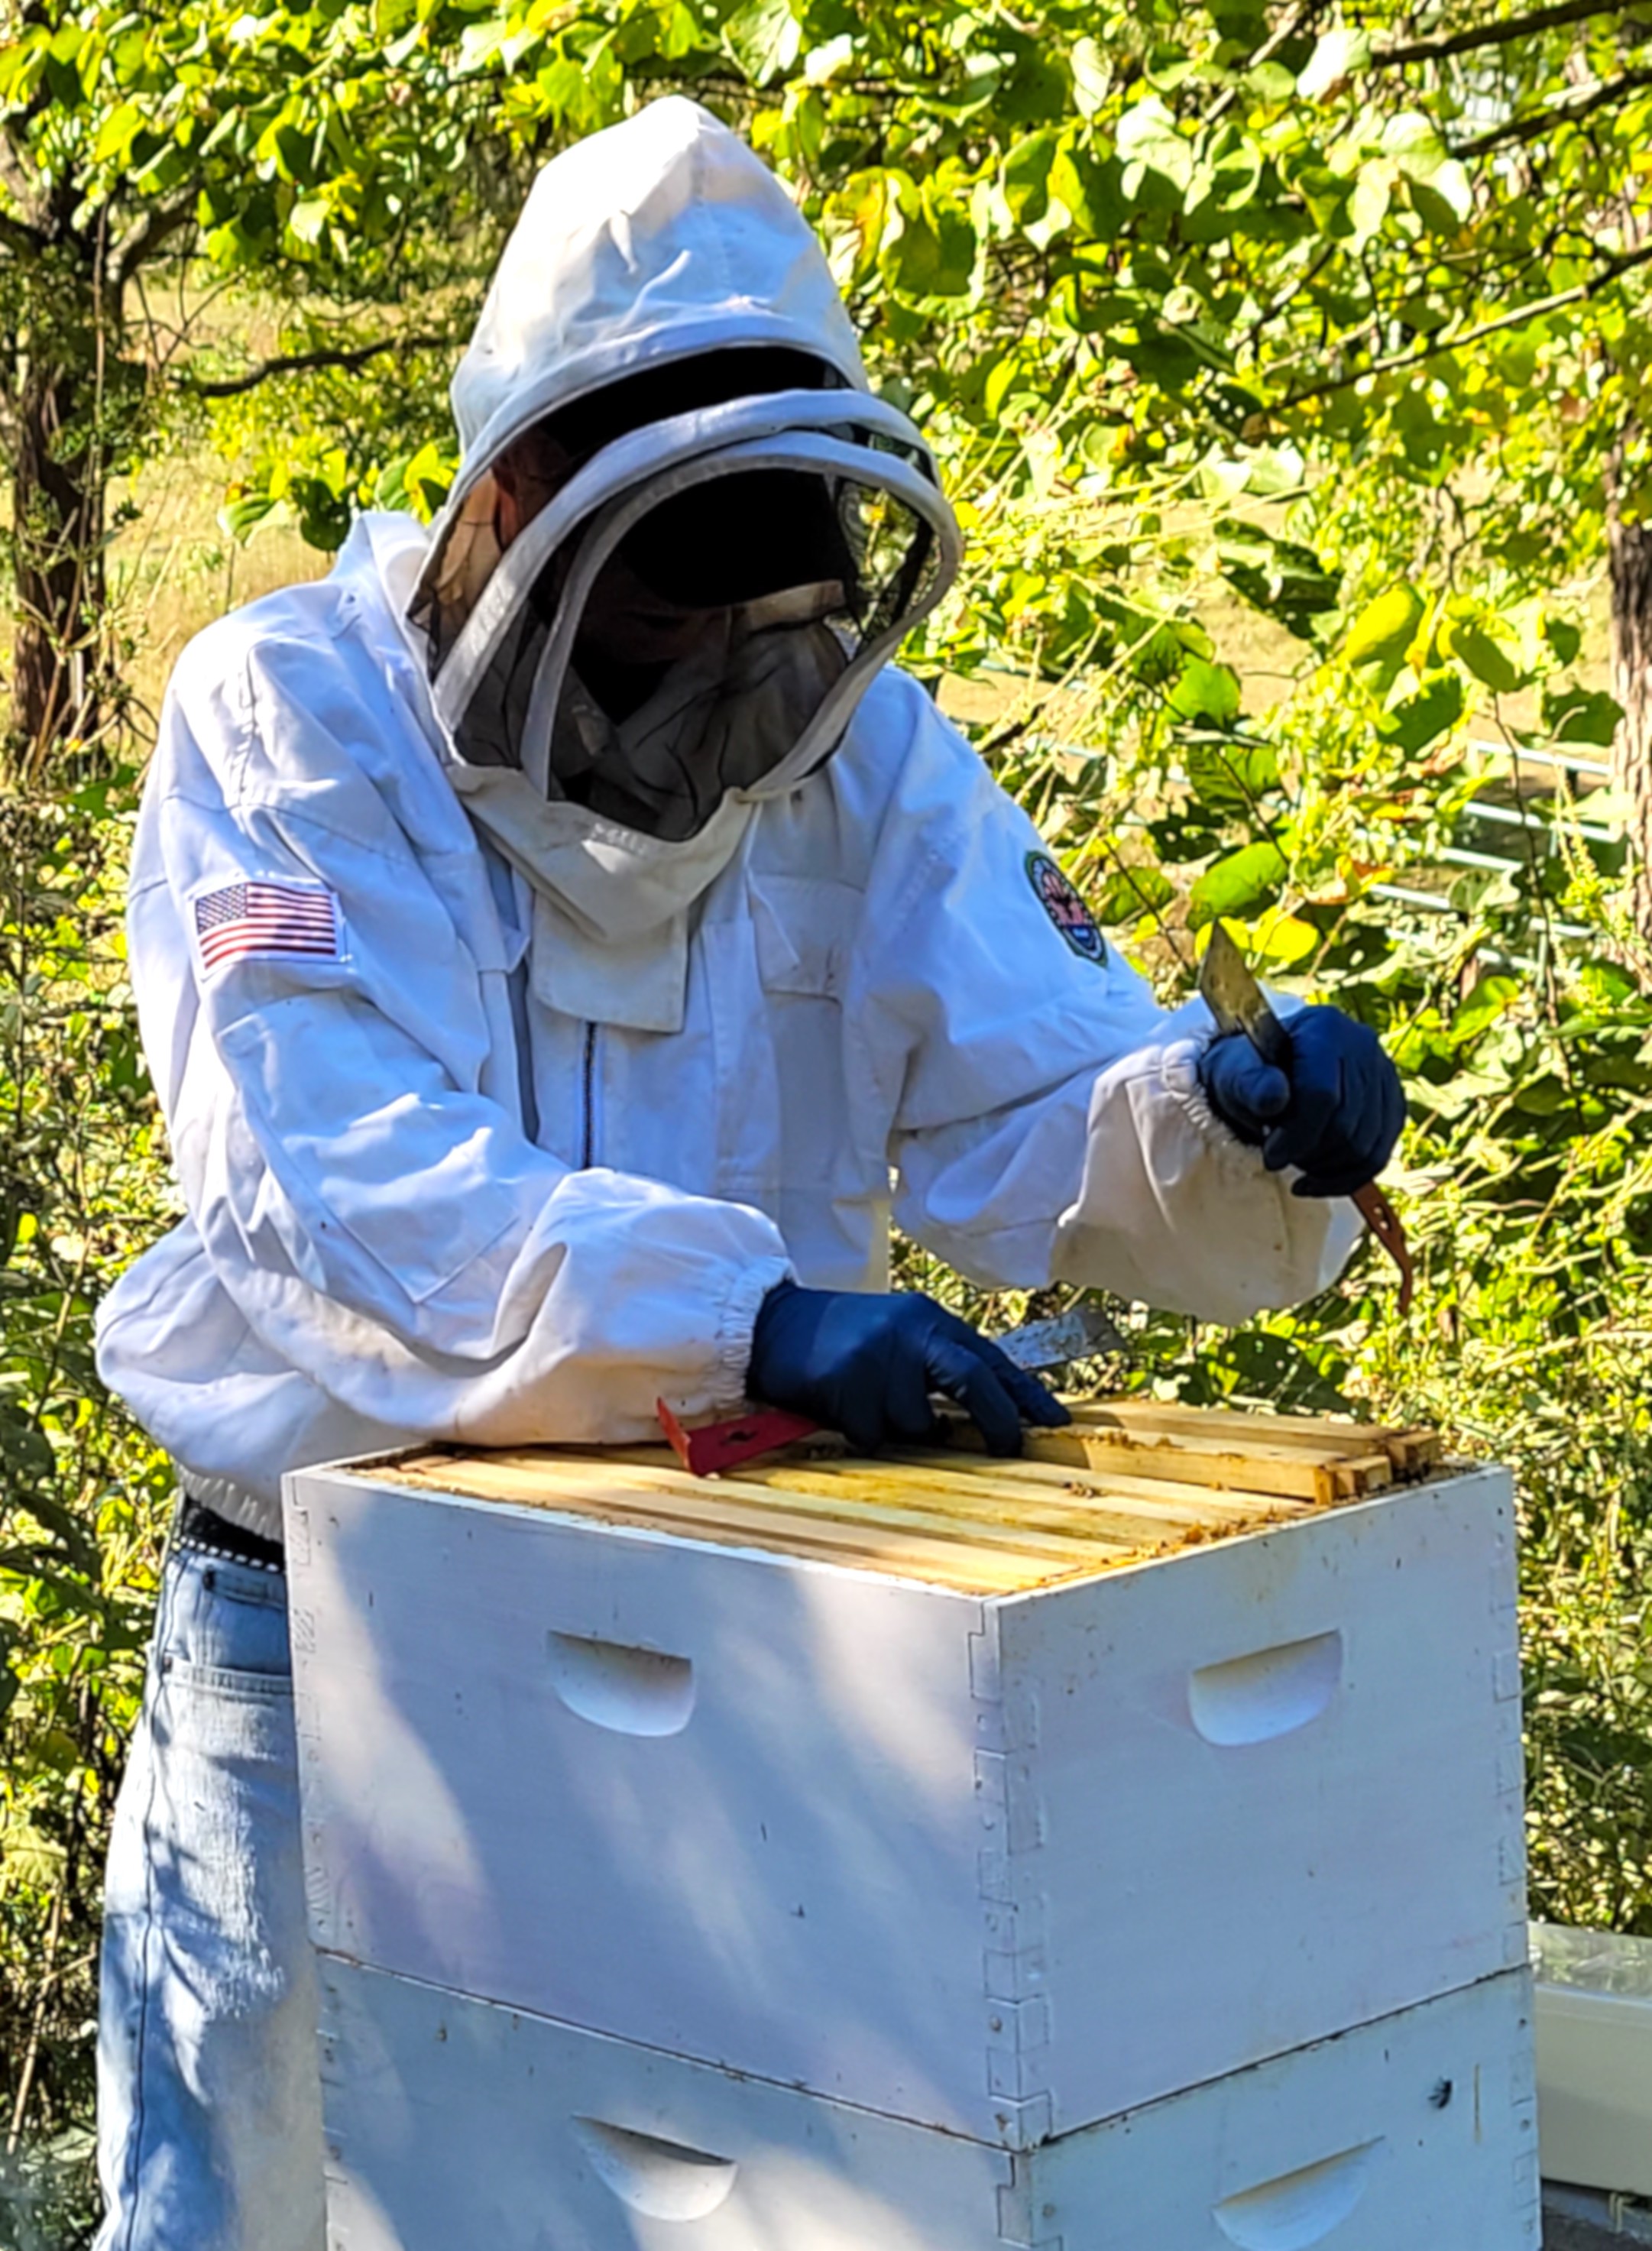 Eric Work maintains beehives at his farm in Potosi, Mo. Work, a 25-year Army veteran, says the Heroes to Hives program offered through University of Missouri Extension and Michigan State University Extension gives veterans and their families an opportunit